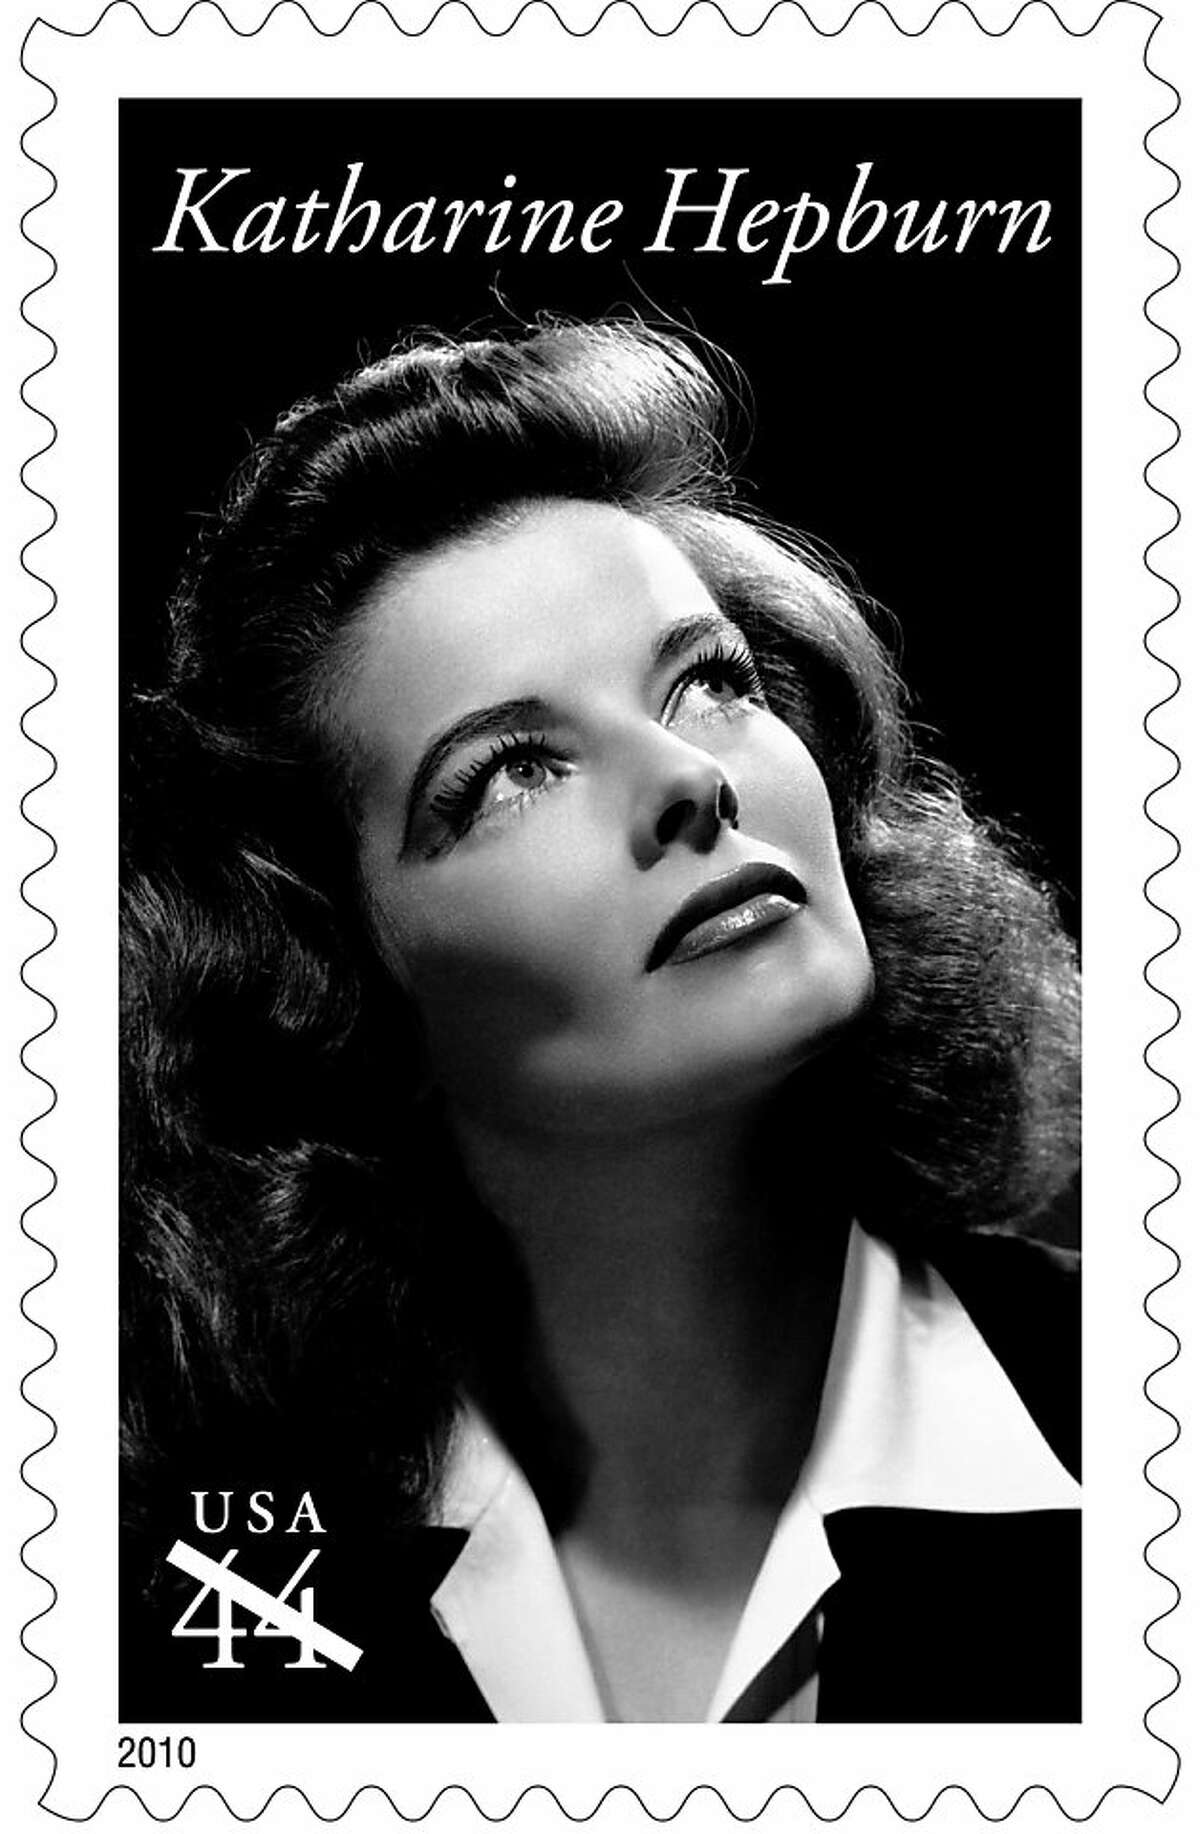 This undated handout photo provided by the U.S. Postal Service shows a first-class postage stamp showing Katharine Hepburn, that will go on sale nationwide Wednesday. Katharine Hepburn is 16th movie star in Legends of Hollywood stamp series. (AP Photo/USPS) Ran on: 05-14-2010 Katharine Hepburn receives rare honor.